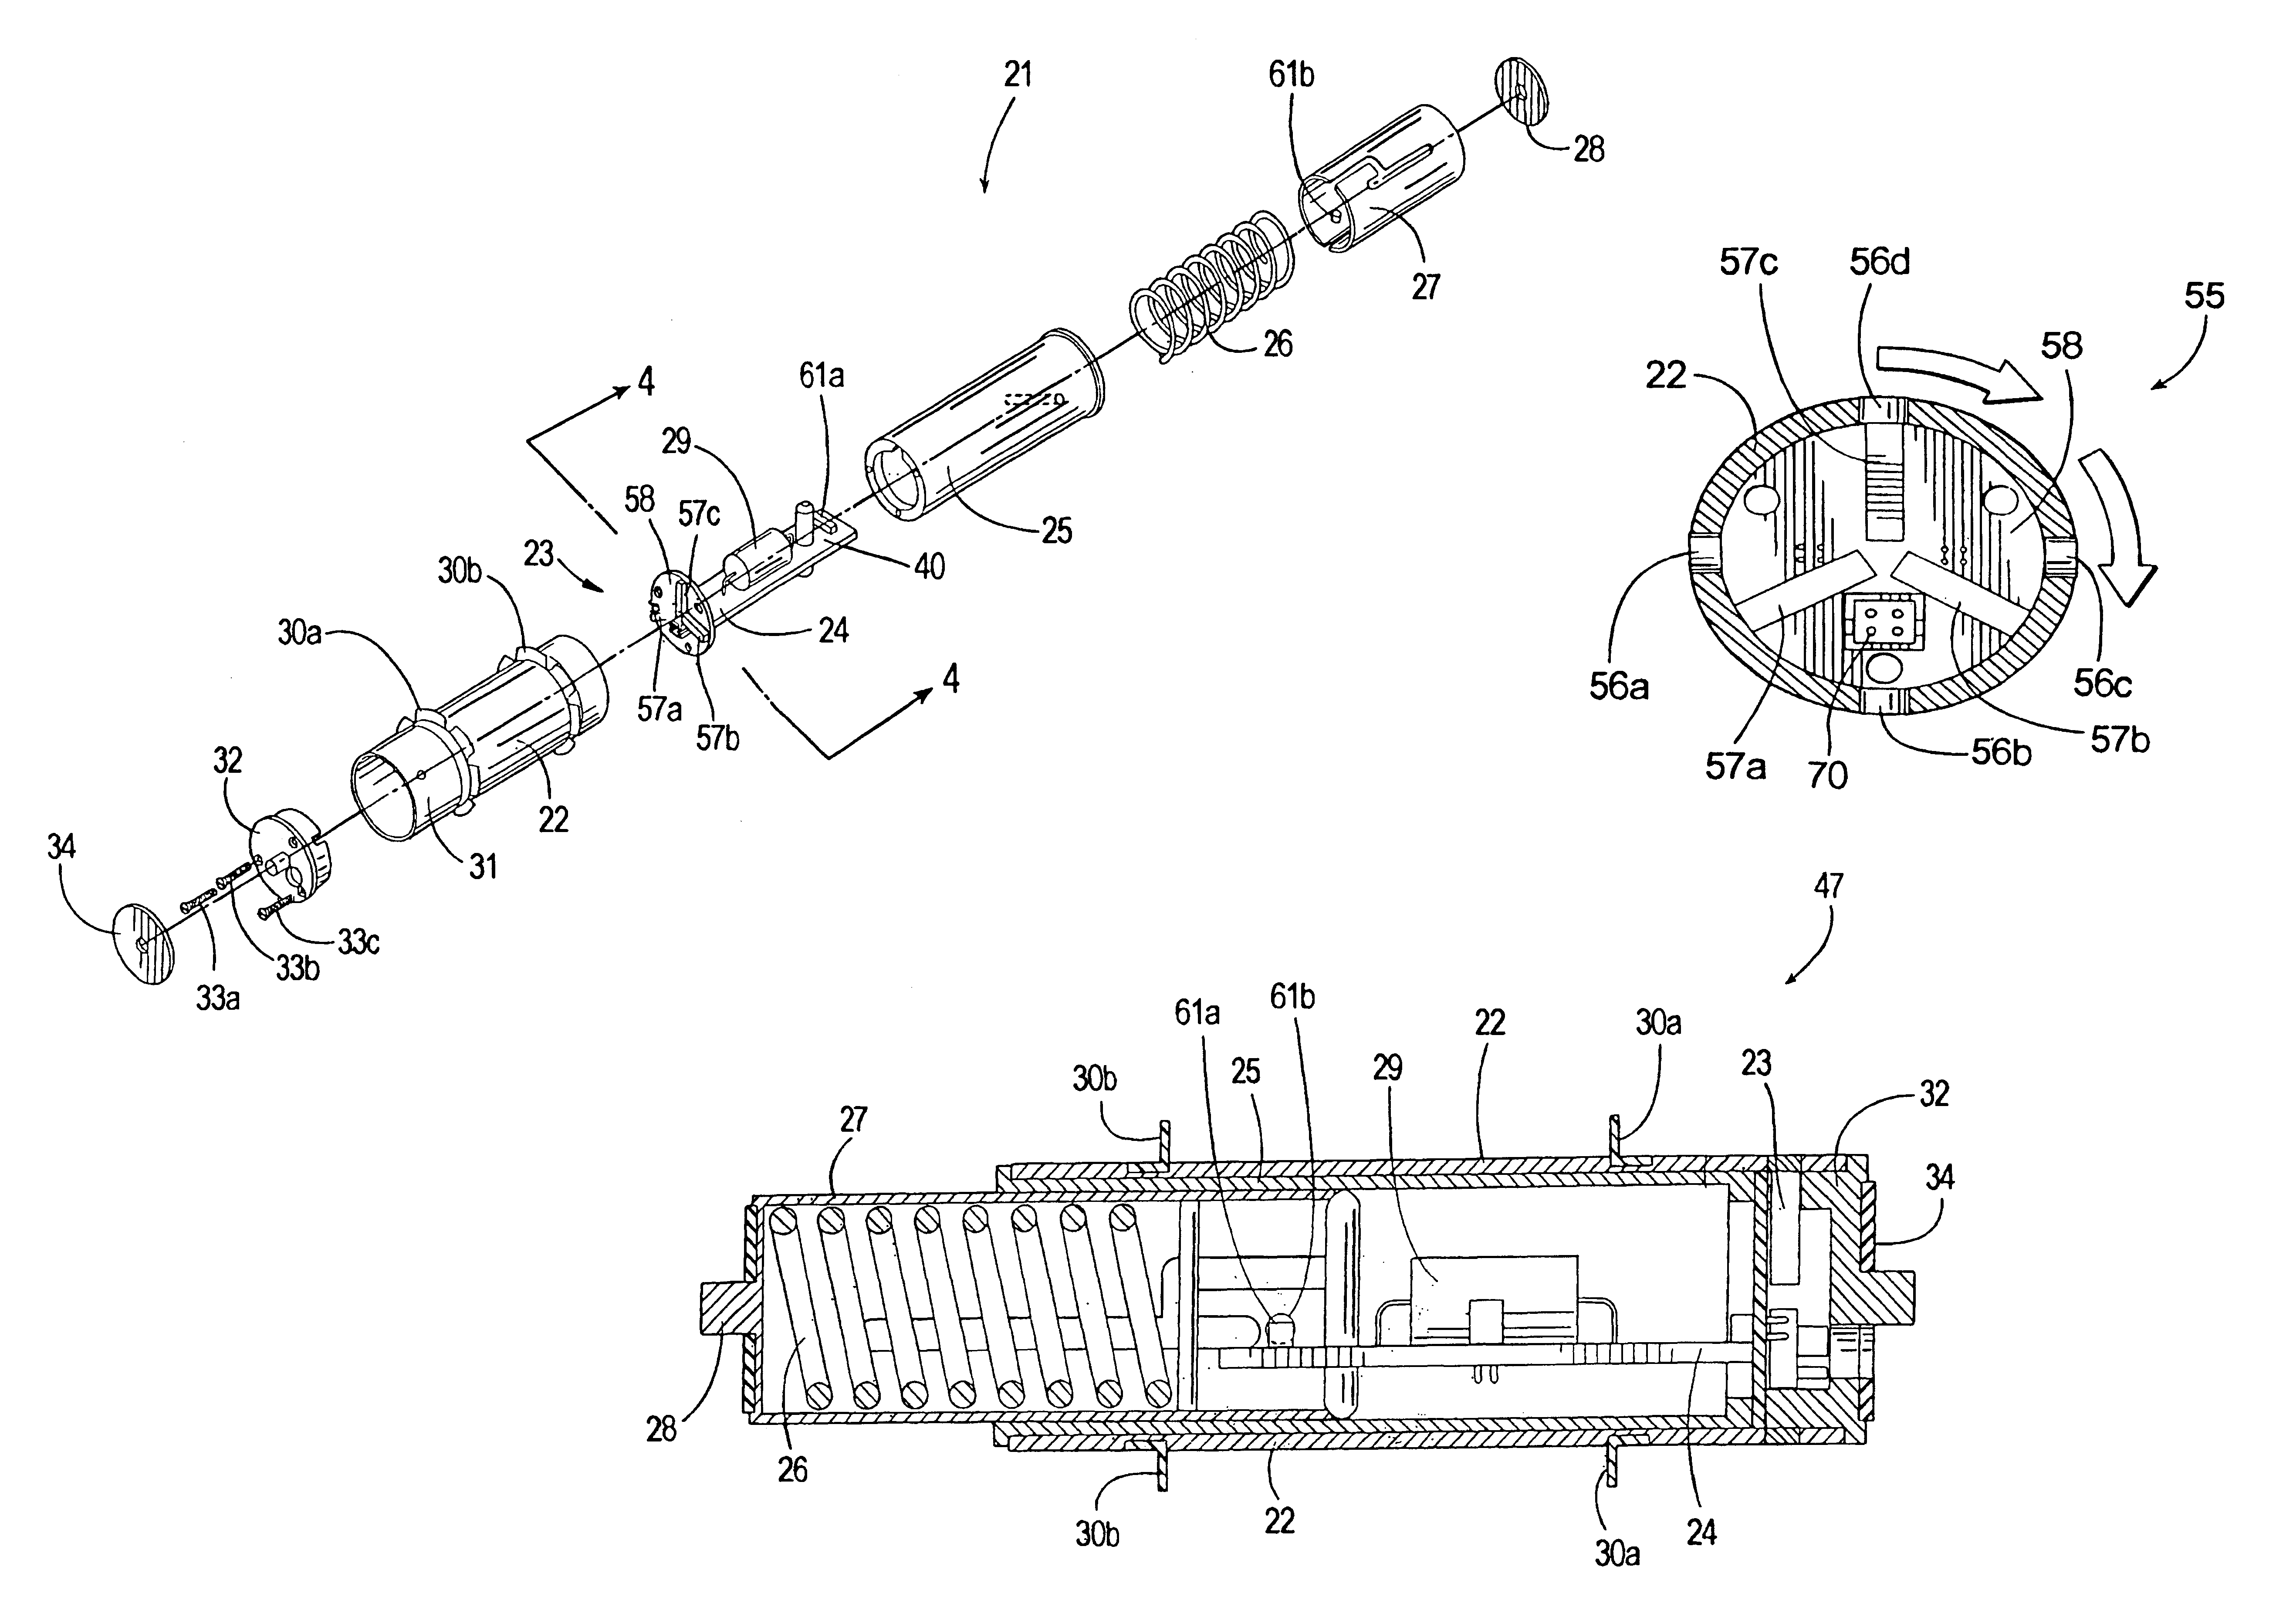 Spindle system, apparatus, and methods for applying spindle apparatus